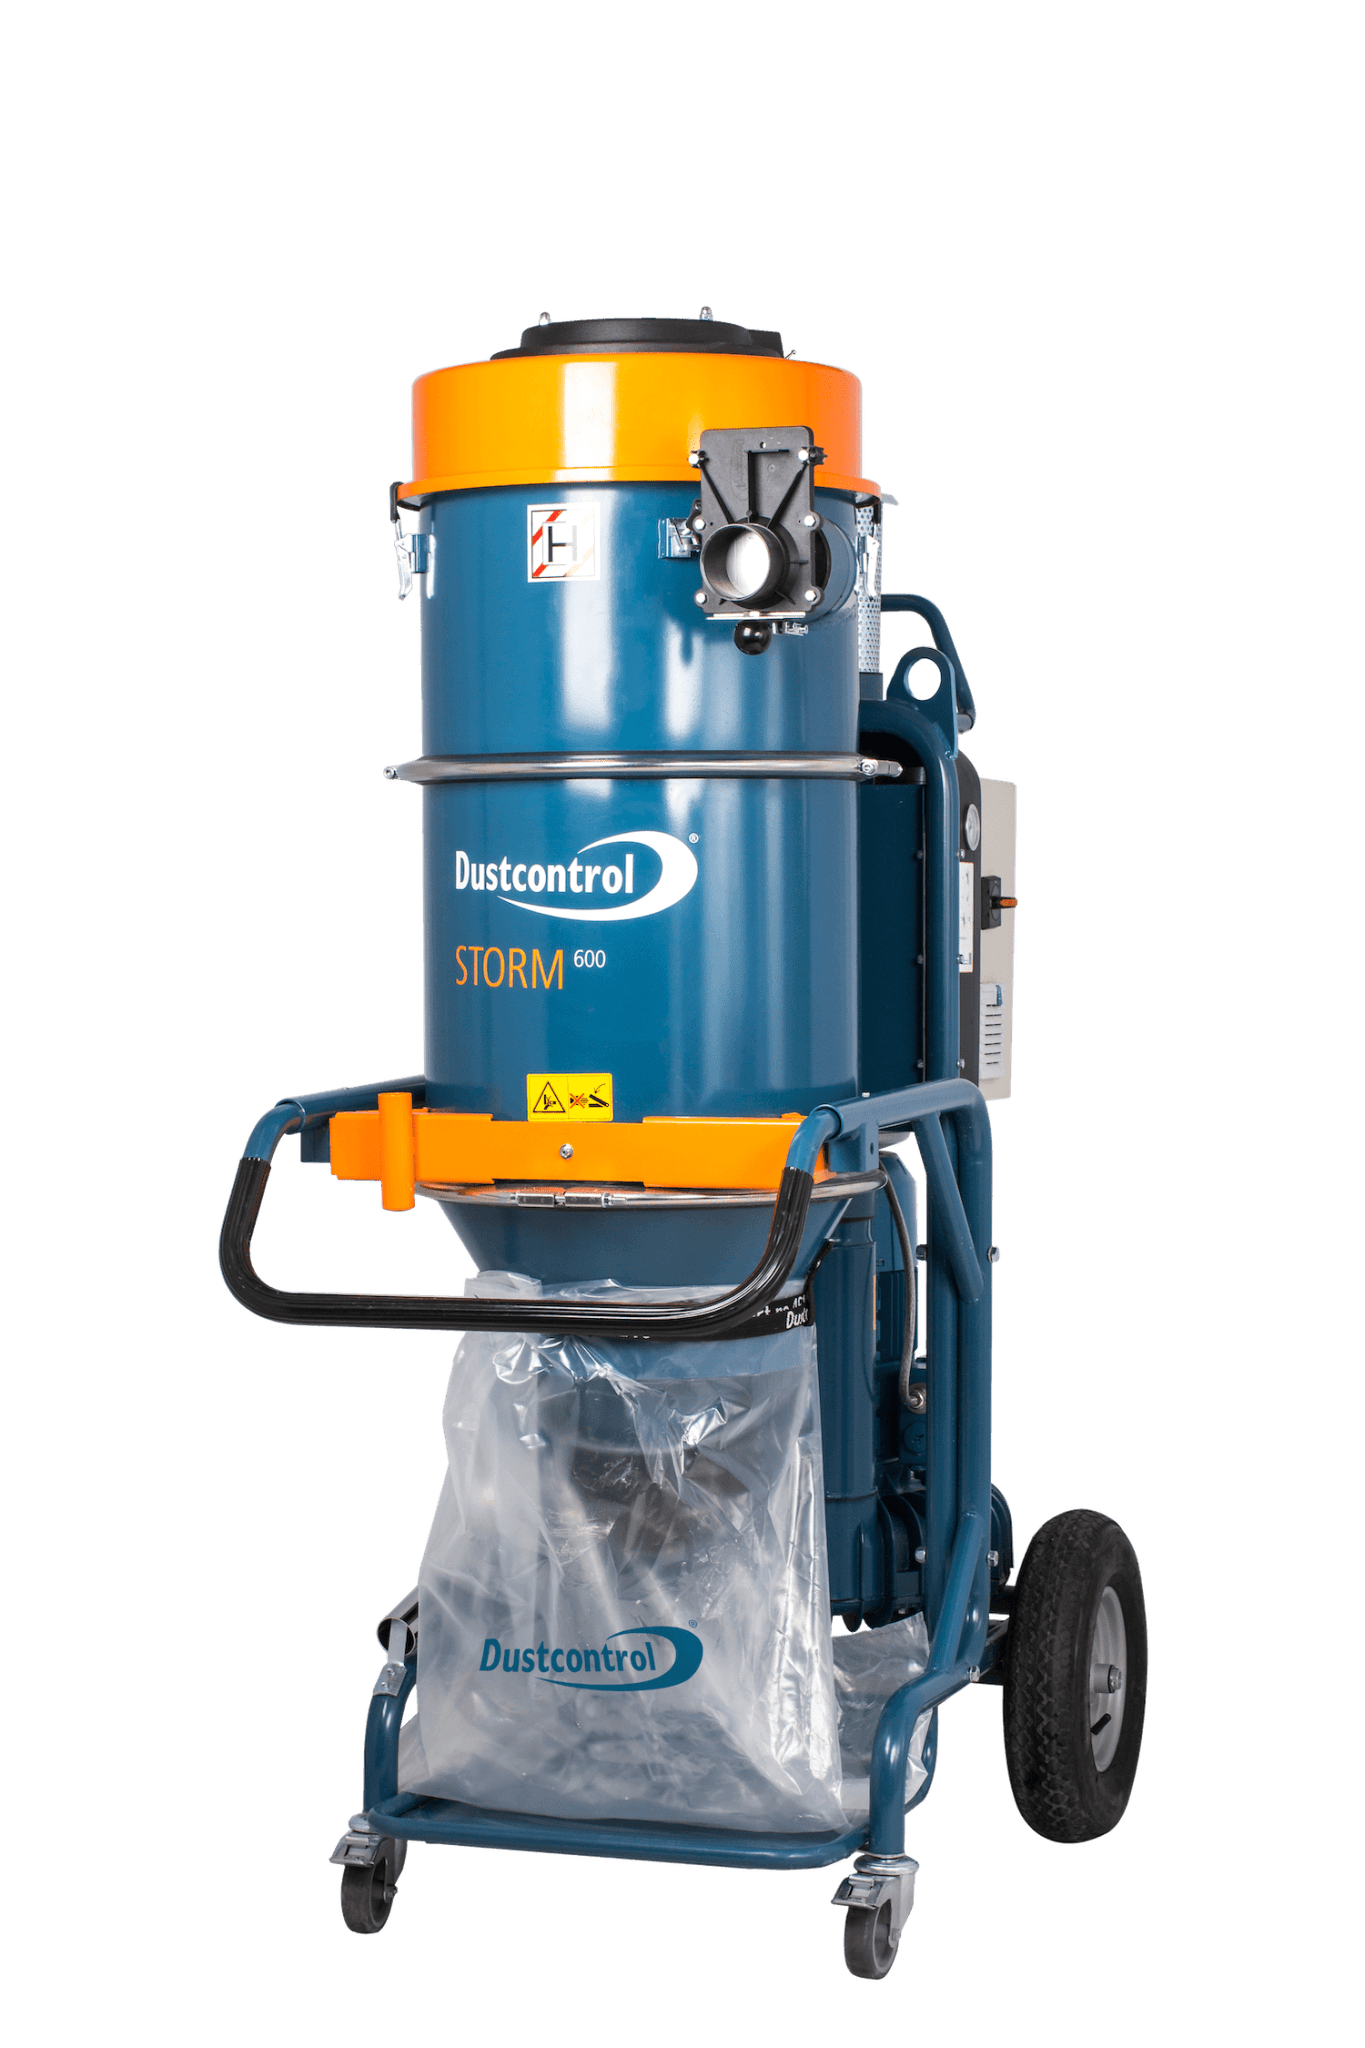 STORM 600L DUST COLLECTOR - Xtreme Polishing Systems - dust collectors, dust collector systems, concrete dust extractors